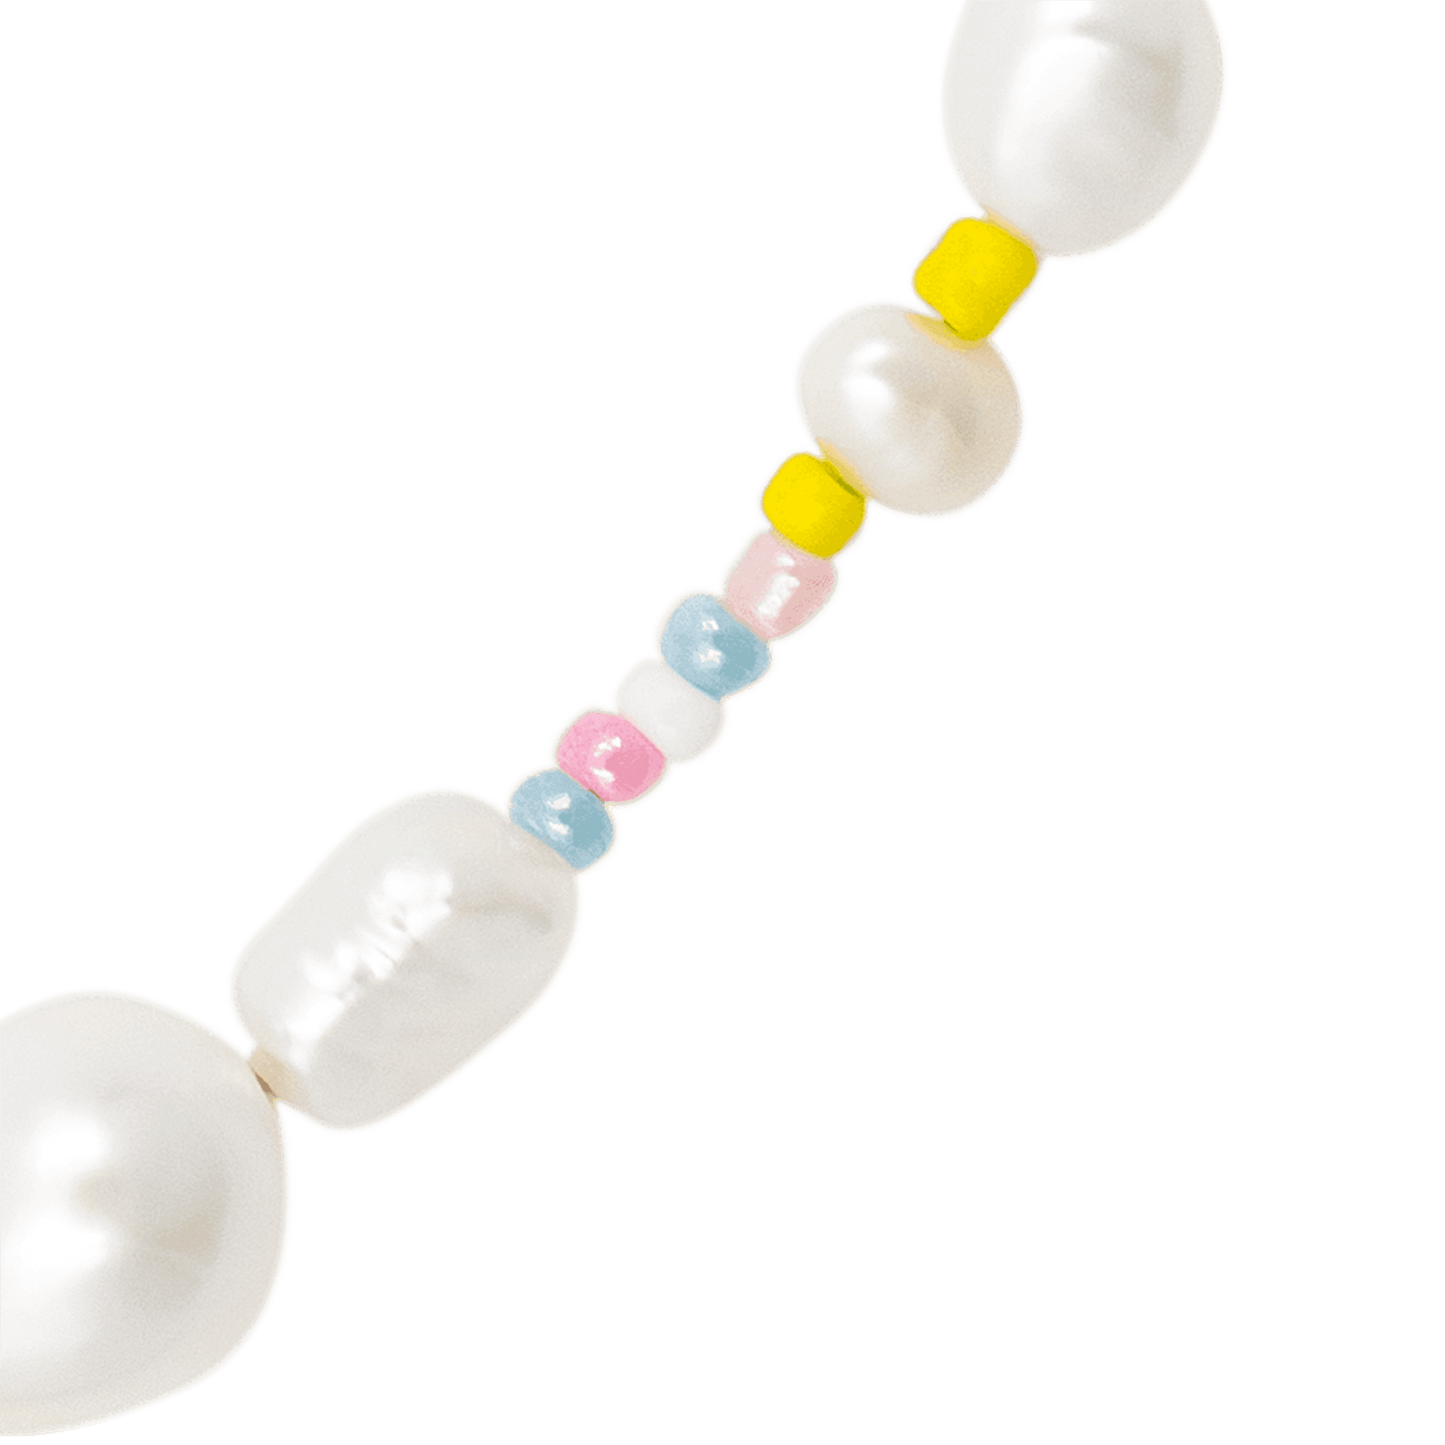 Colorful Pearly Choker Silber